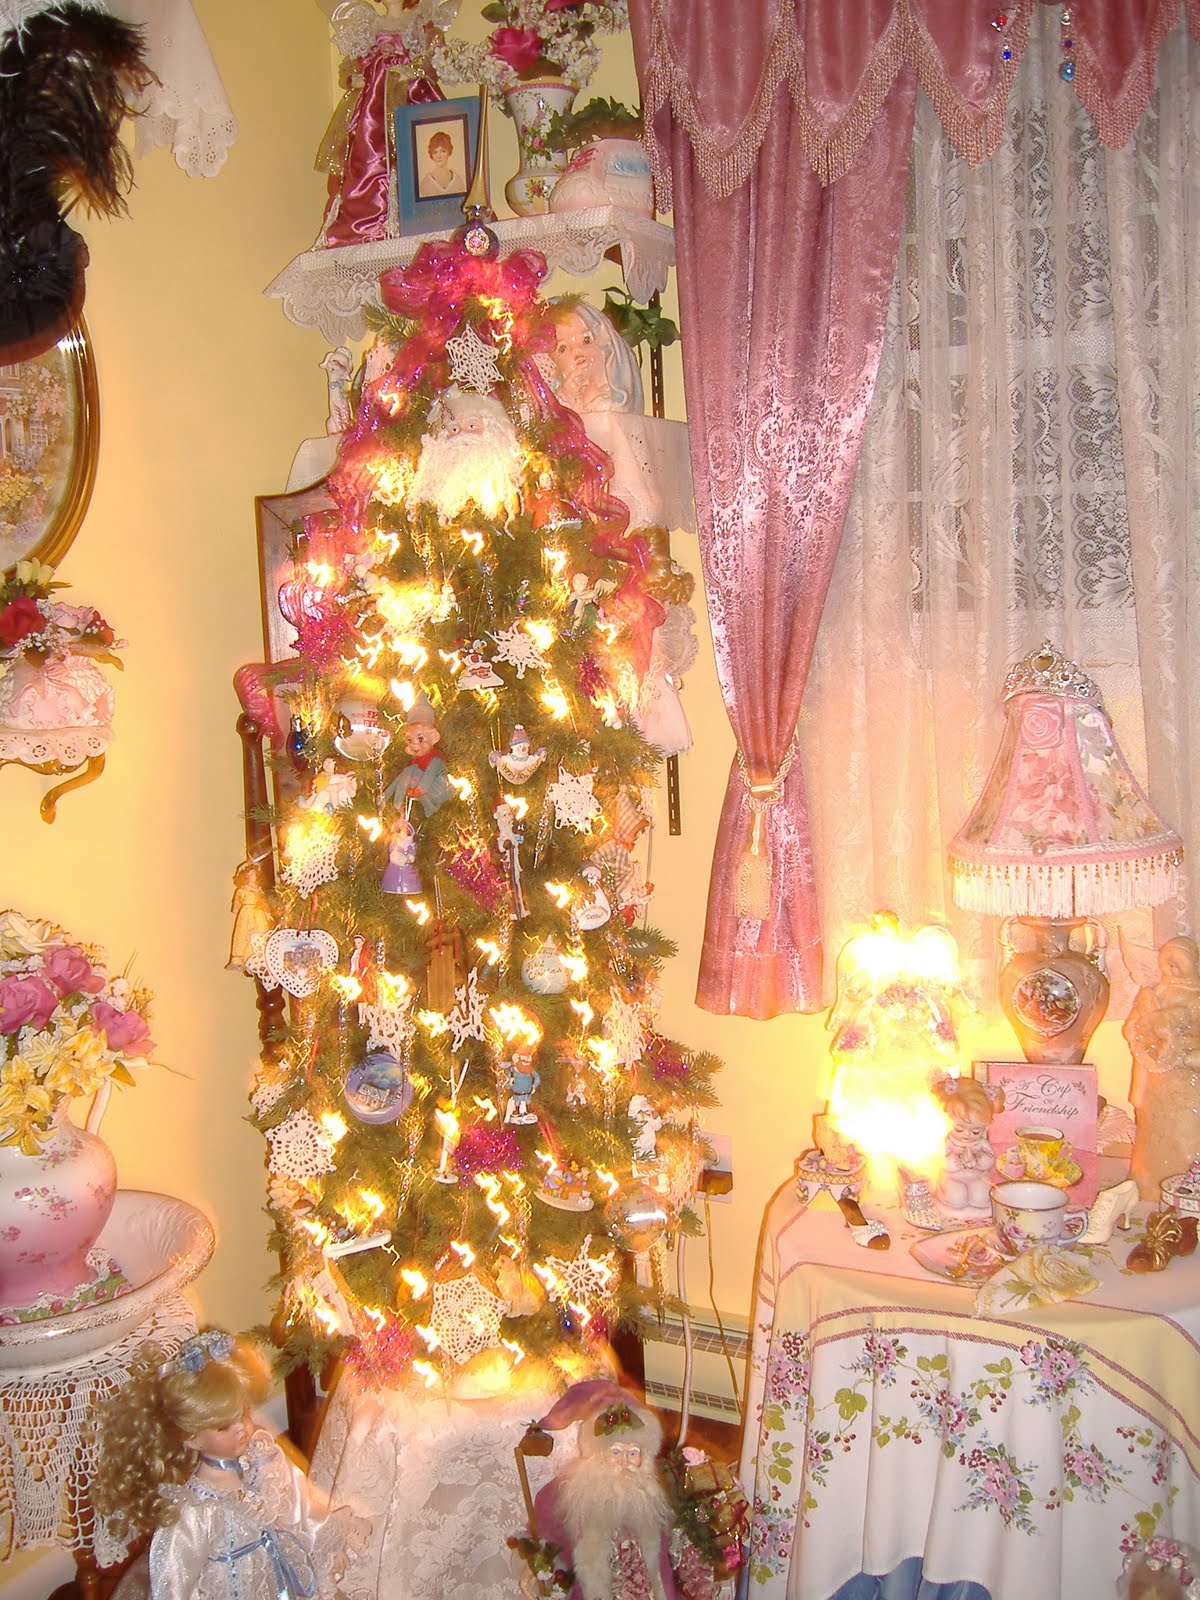 A DEBBIE-DABBLE CHRISTMAS: Country Folks Tour Part 3 And Christmas Tree # 4